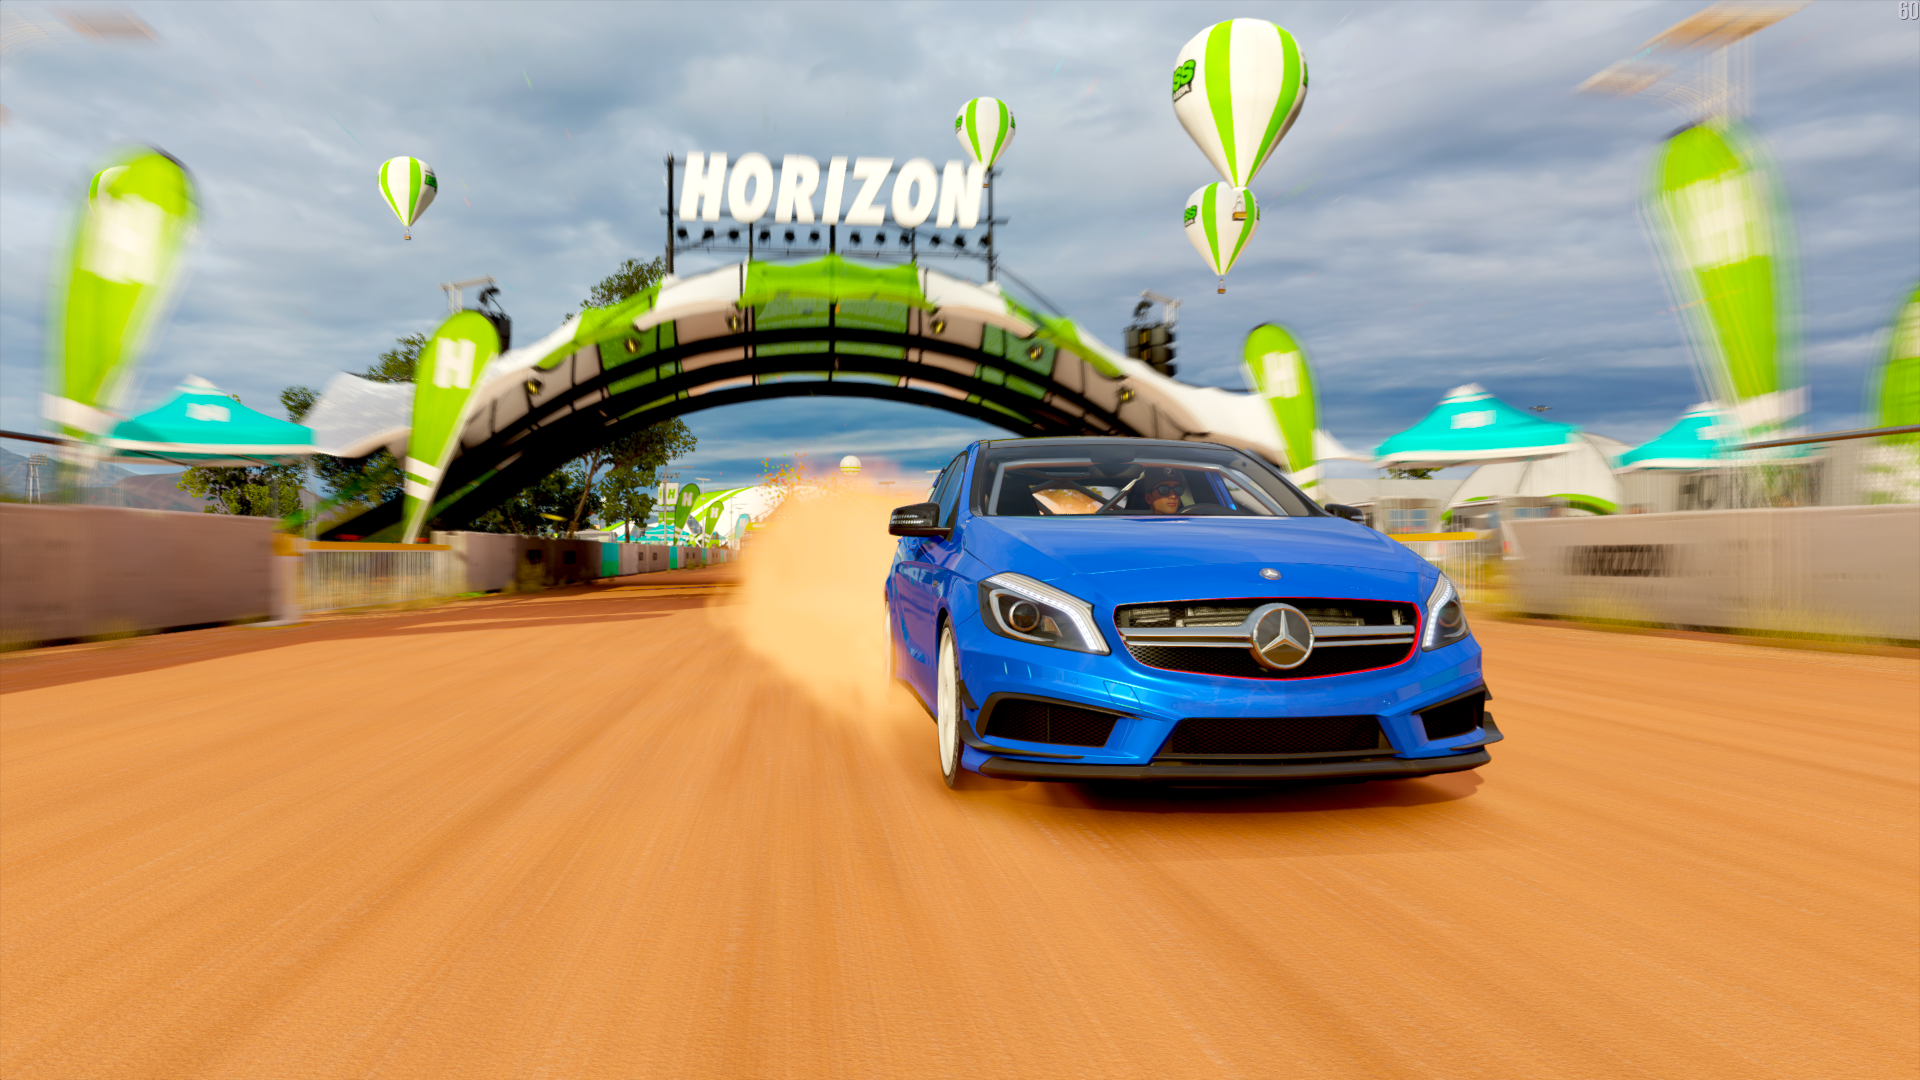 Forza Racing Race Cars Xbox Xbox One Microsoft PC Gaming Master Race Screen Shot Mercedes Benz A45 F 1920x1080